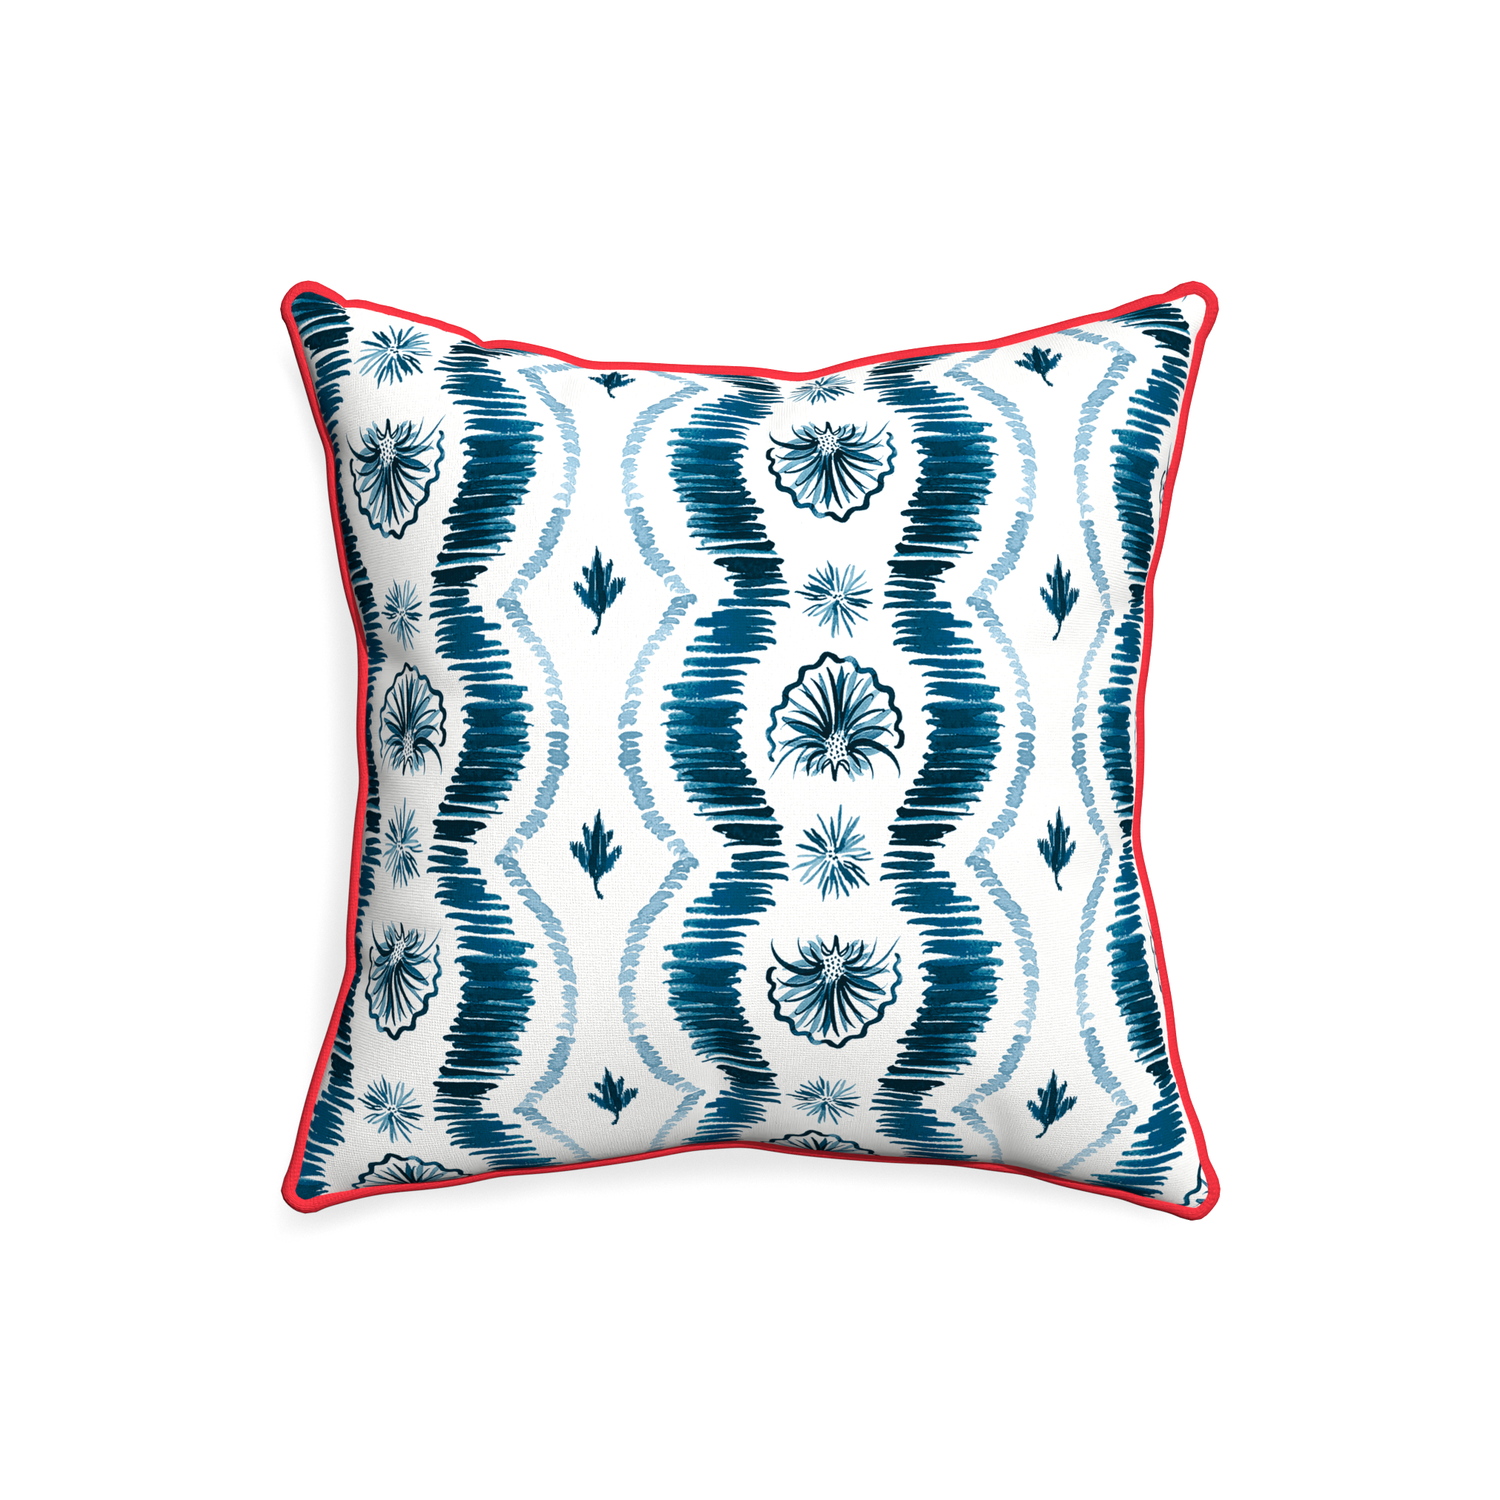 20-square alice custom blue ikatpillow with cherry piping on white background